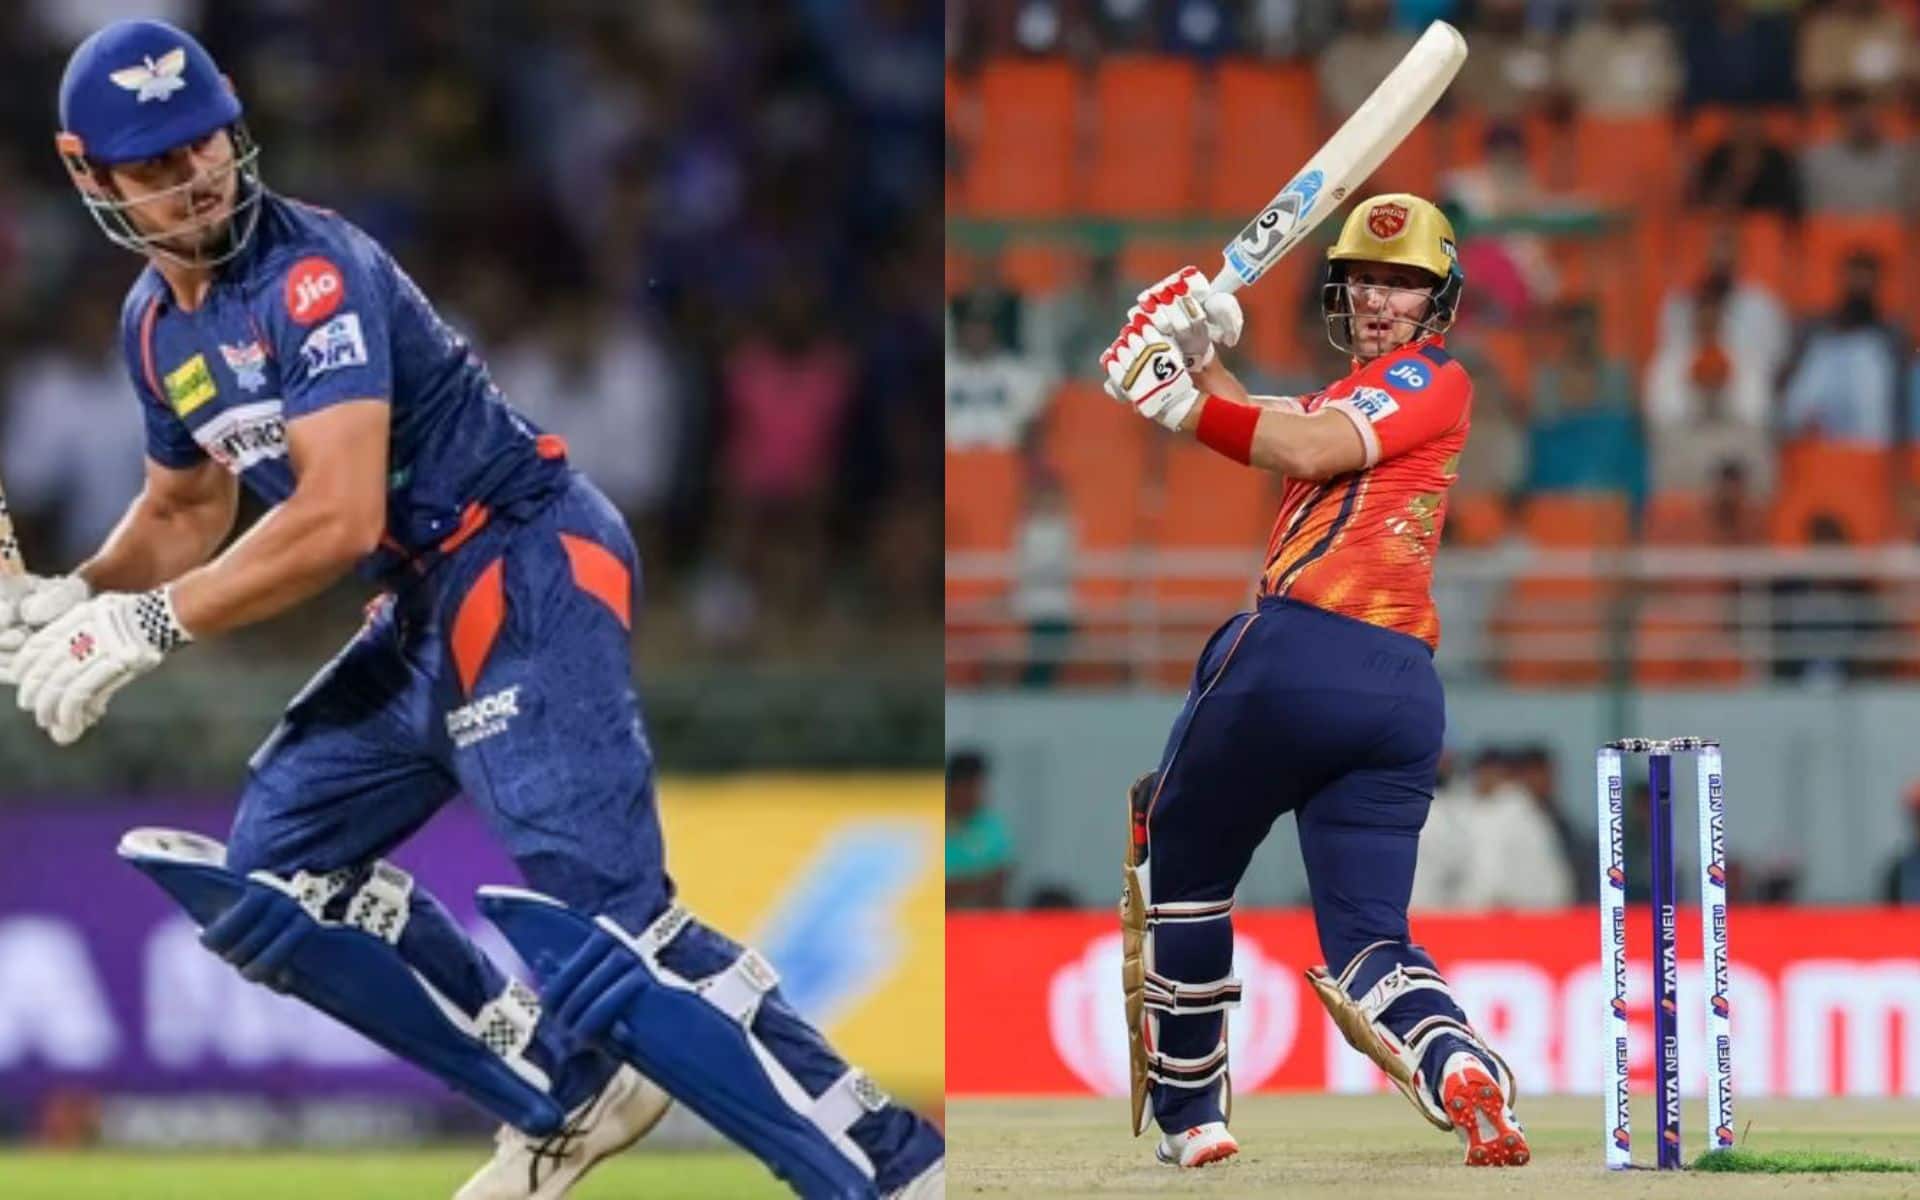 Marcus Stoinis and Liam Livingstone will be seen as the finishers for their team in the match [iplt20.com]